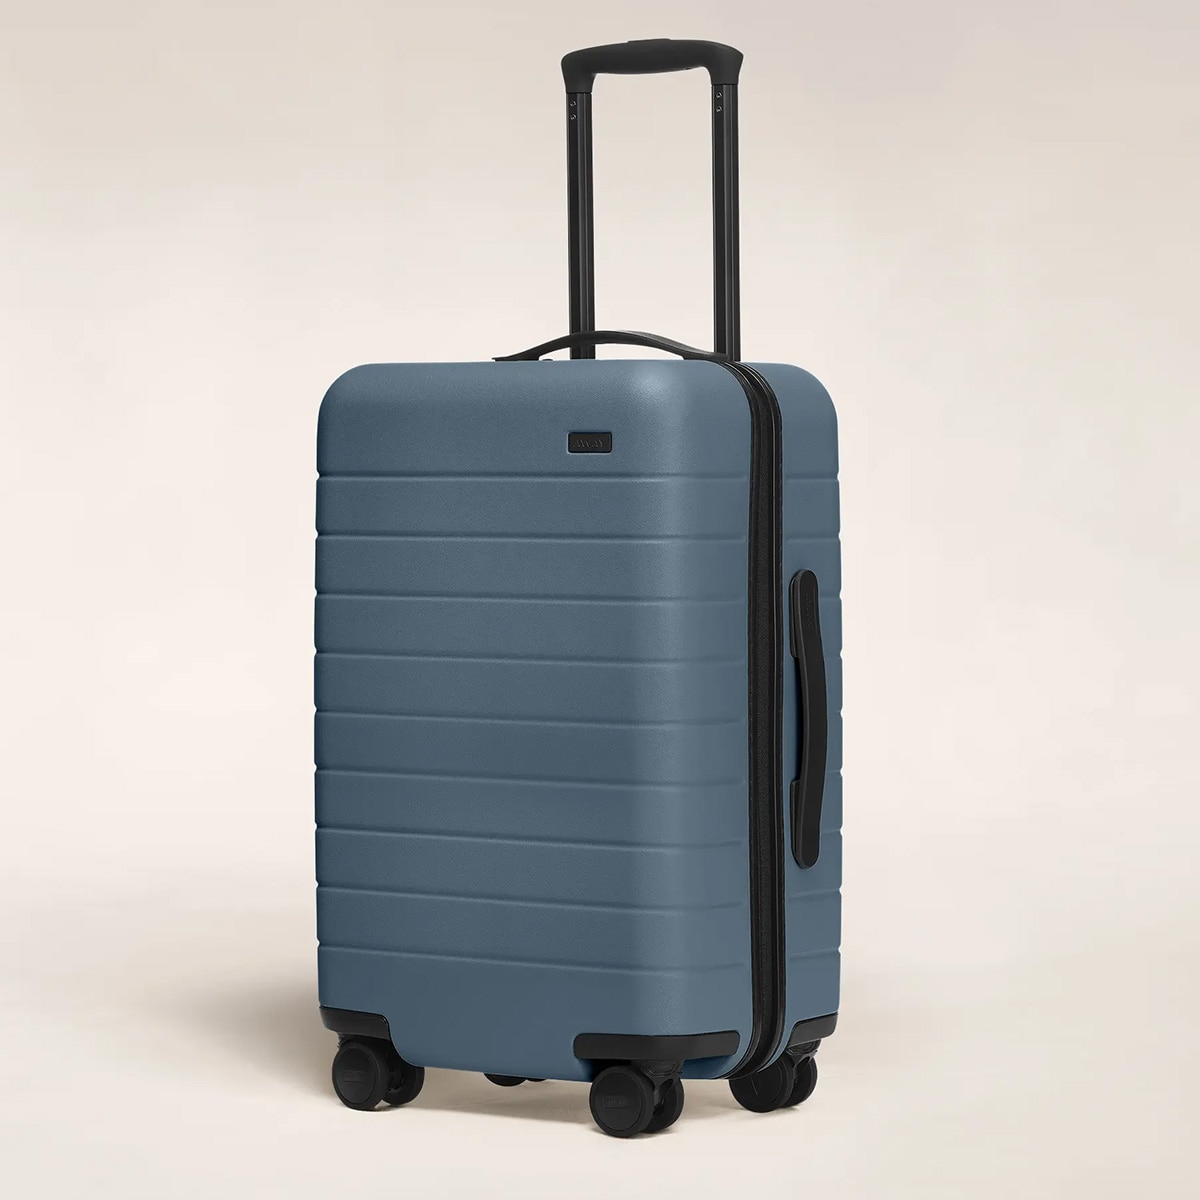 E! Insider’s 20 Days of Giftmas Giveaways: Win an Away Carry-On